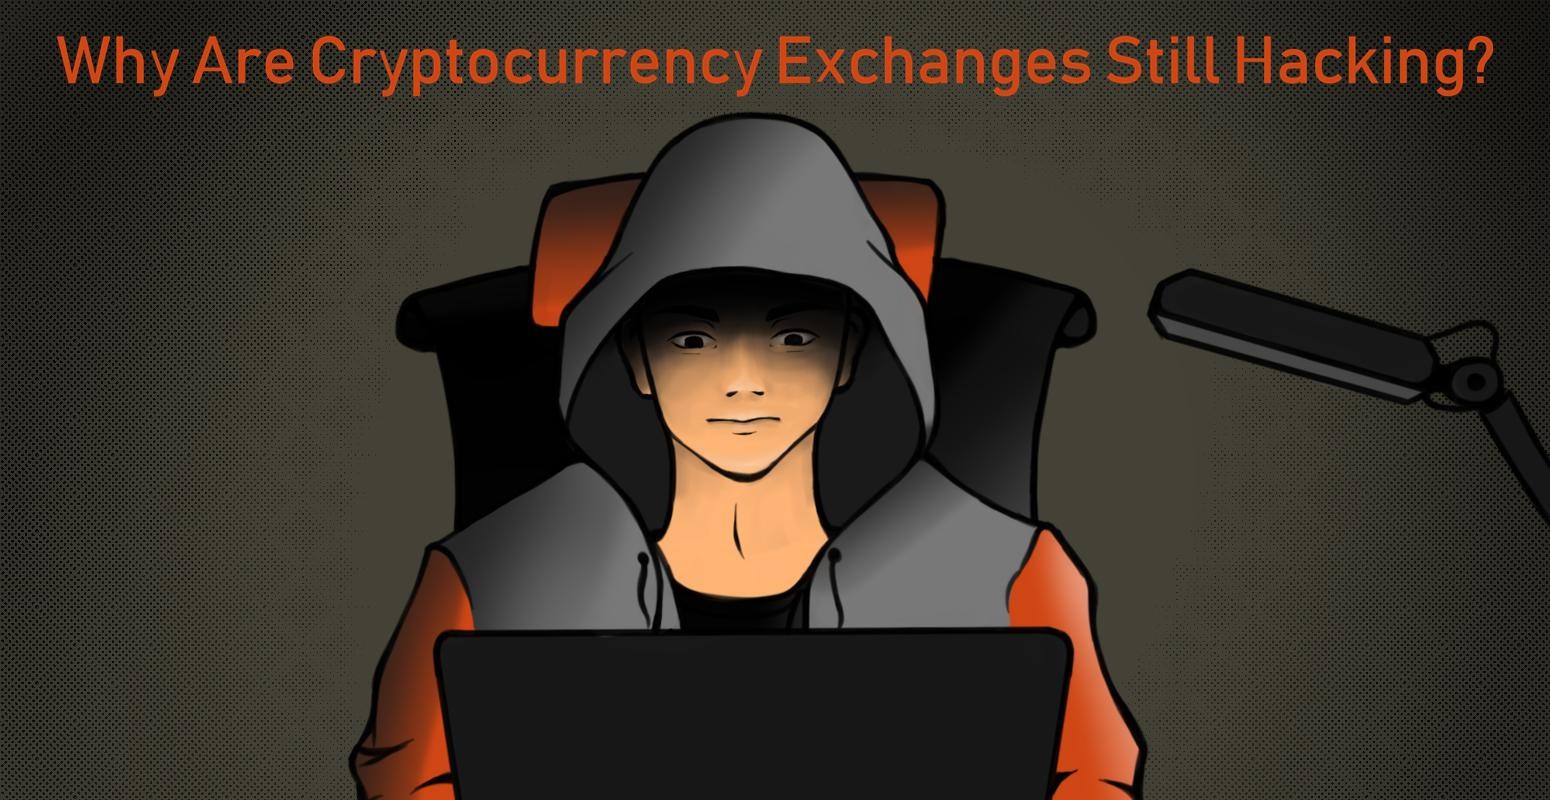 Cryptocurrency exchanges keep getting hacked. Why?